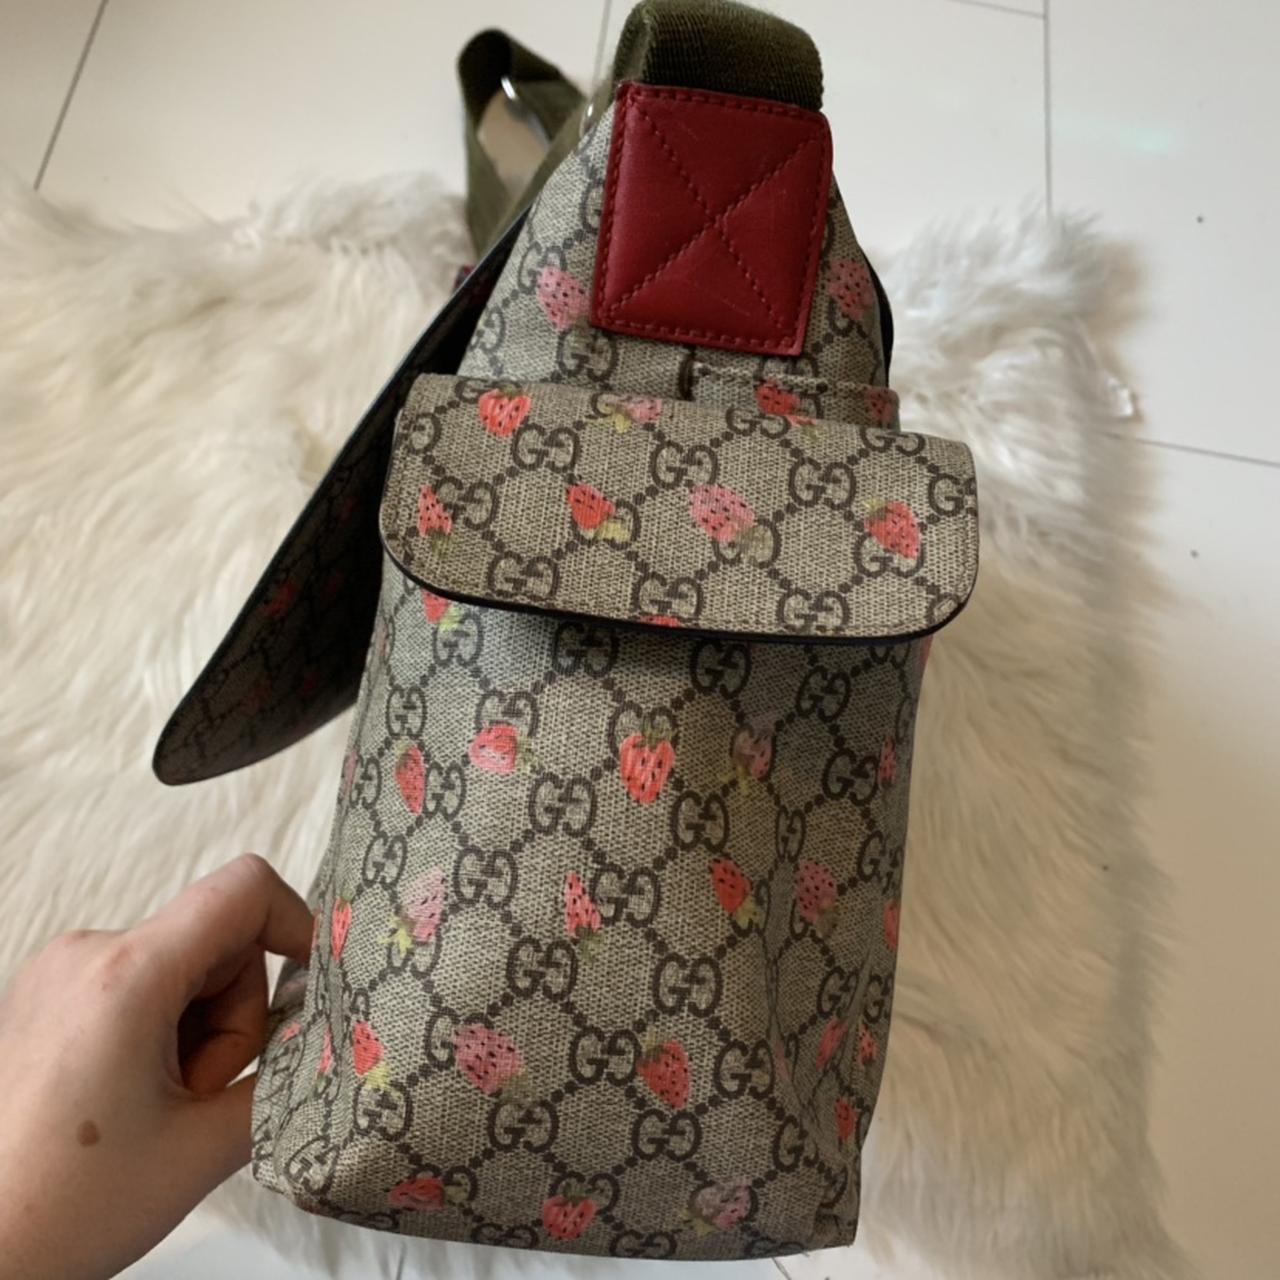 Gucci changing bag Beige and pink Strap is blue - Depop